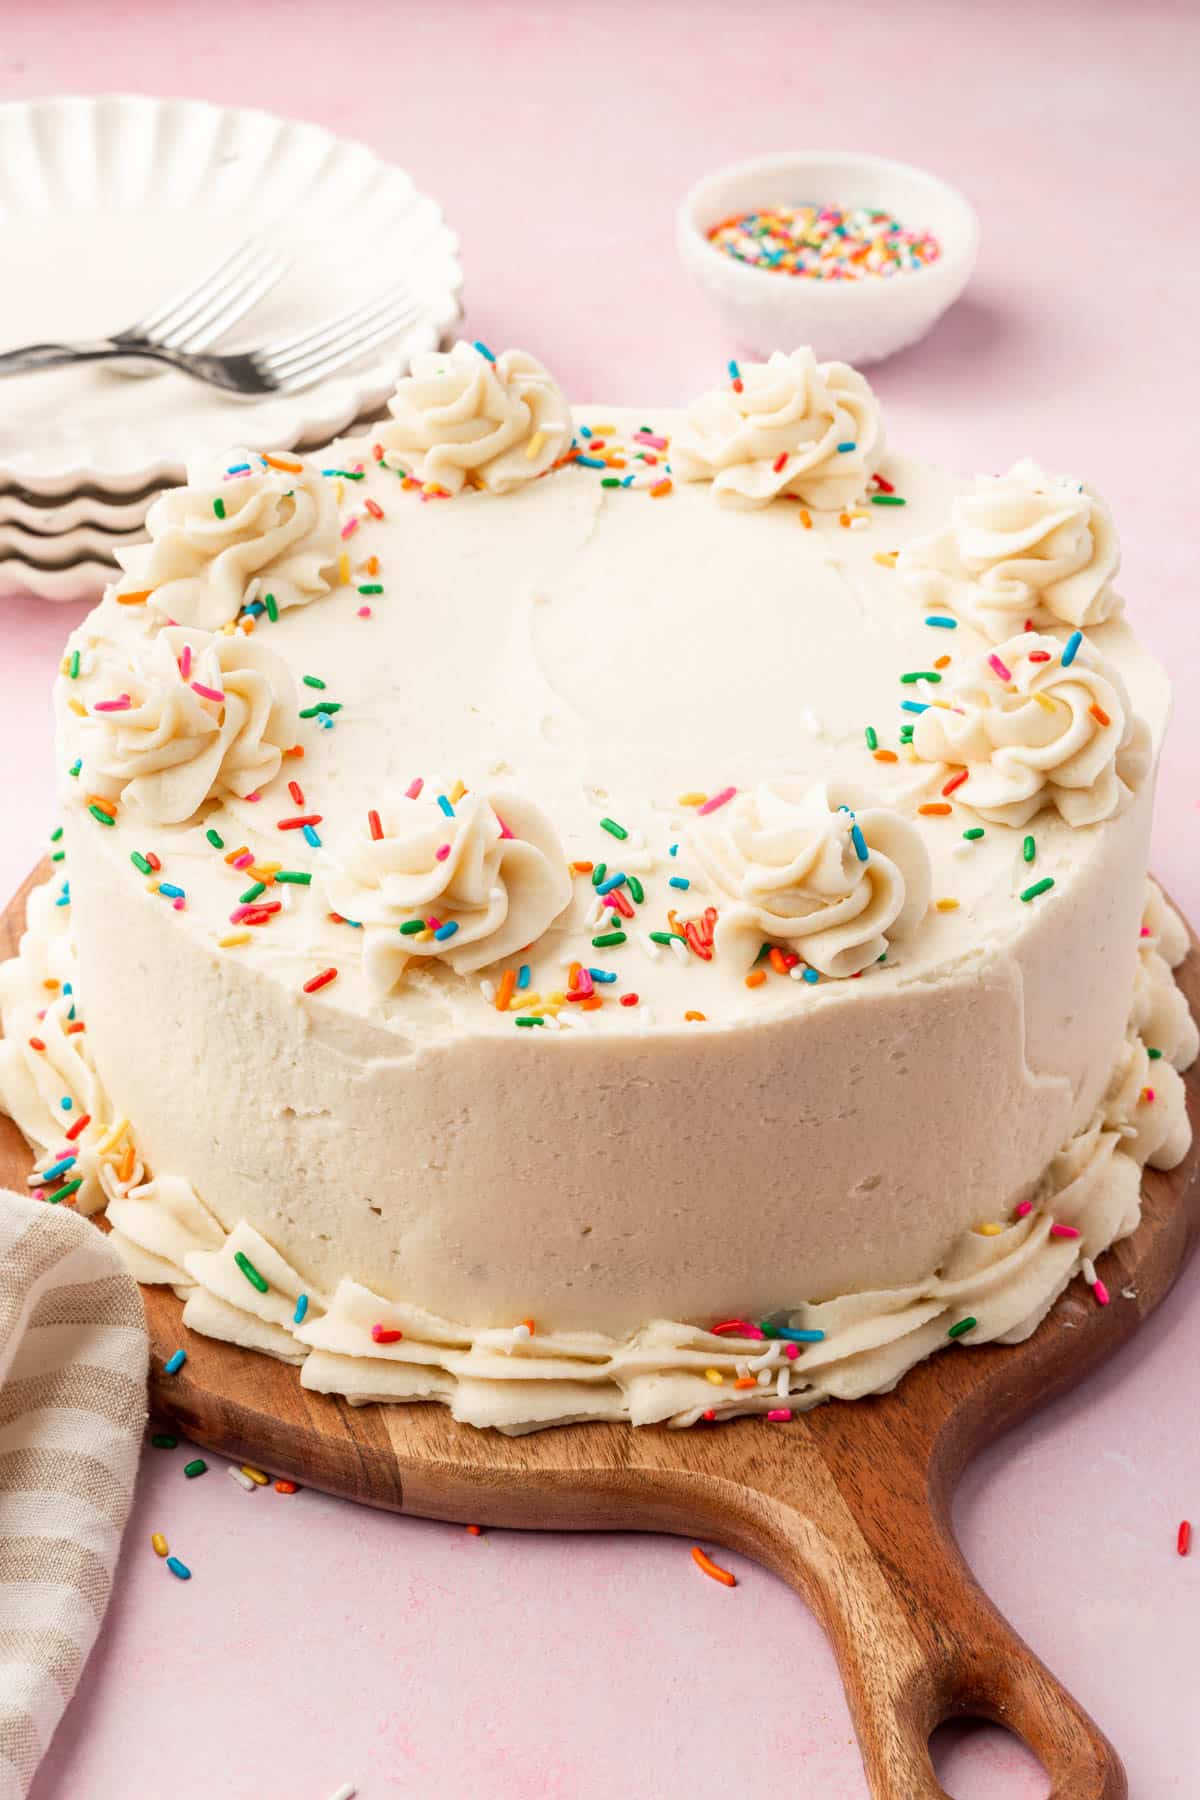 A round gluten free vanilla cake with vanilla frosting and rainbow sprinkles on a wood serving board.